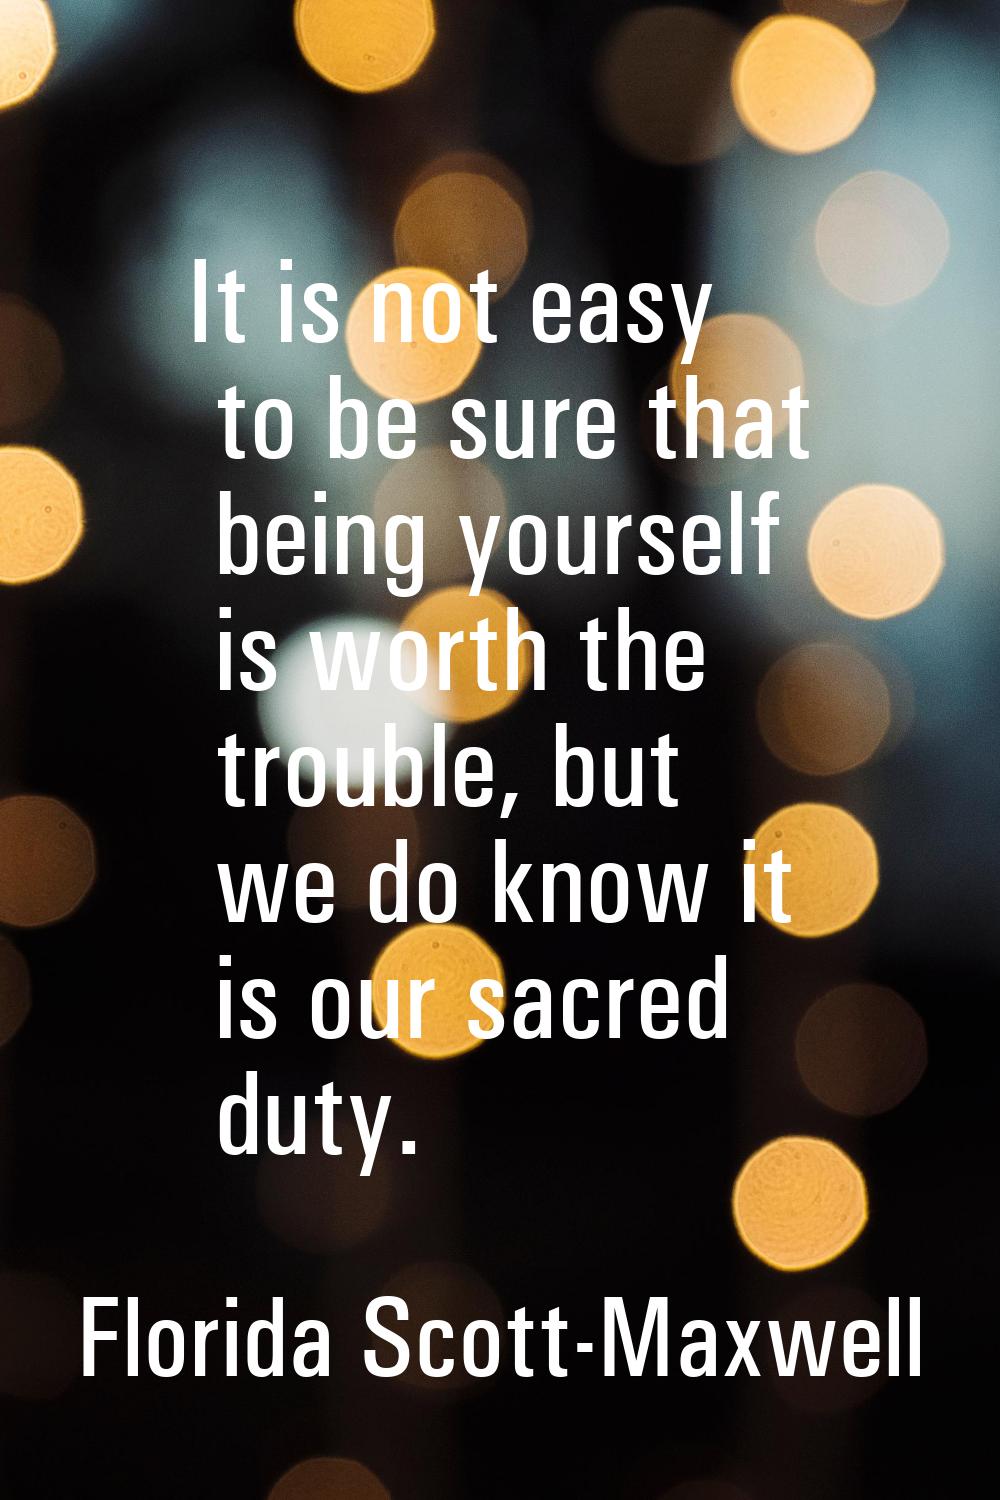 It is not easy to be sure that being yourself is worth the trouble, but we do know it is our sacred